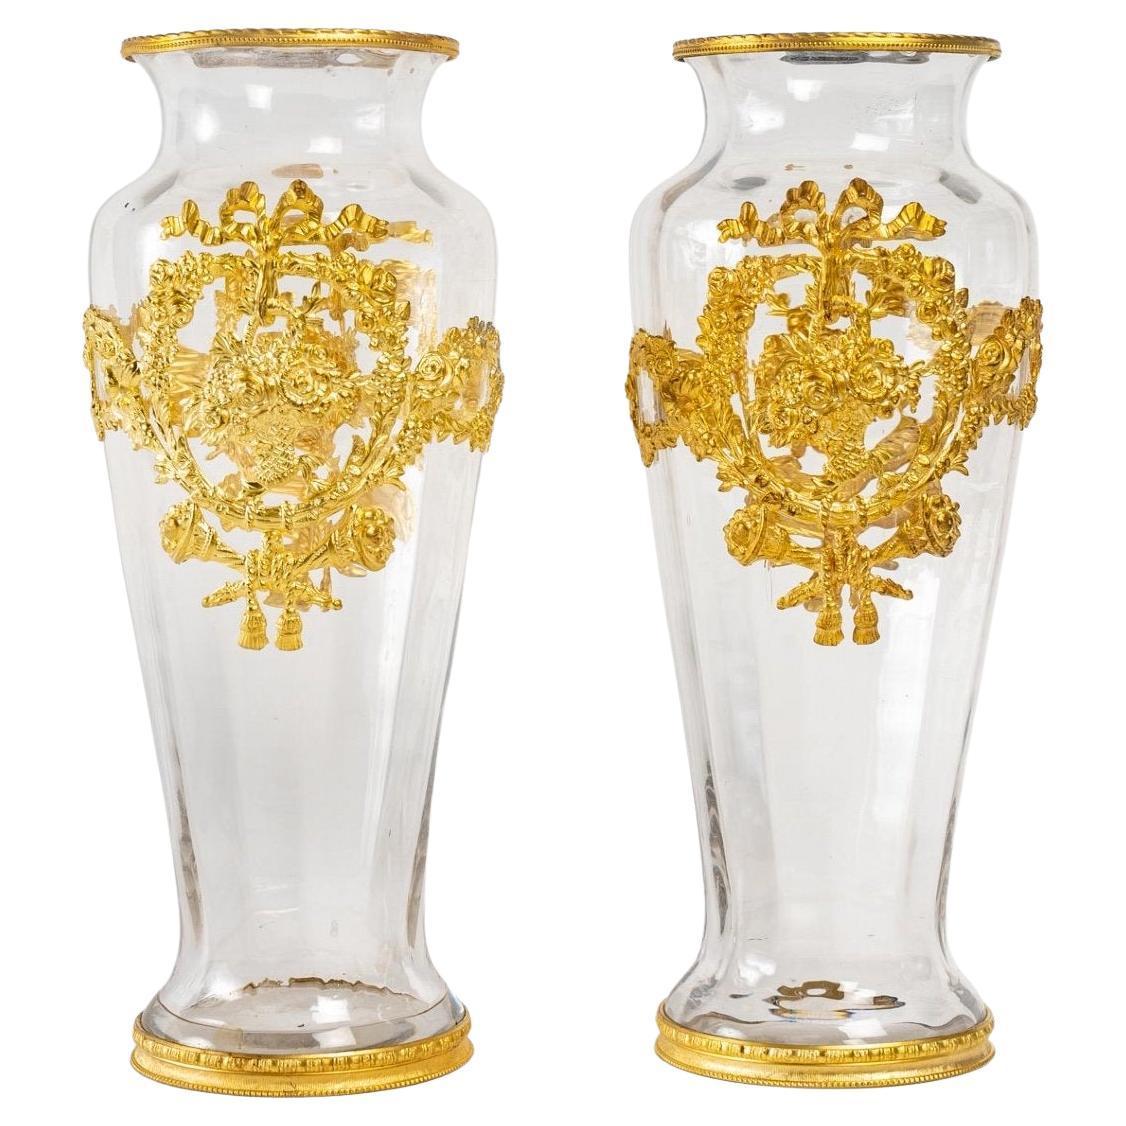 A pair of crystal and gilt bronze vases, Napoleon III period, 19th century.
In perfect condition.
Measures: H: 26 cm, D: 11 cm.
 